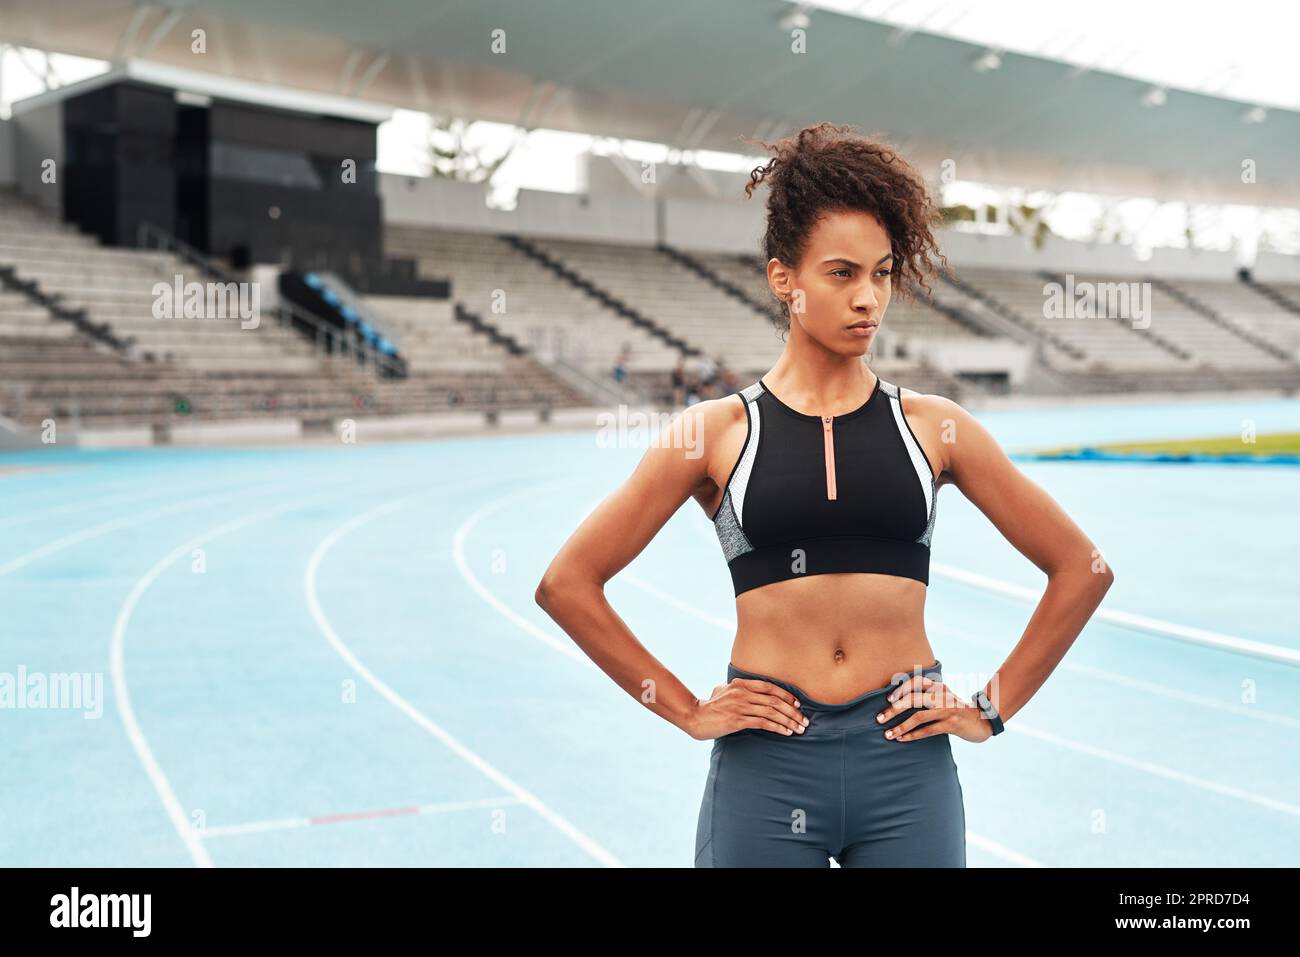 Im ready to train. an attractive young athlete standing akimbo after an outdoor track and field training session alone. Stock Photo